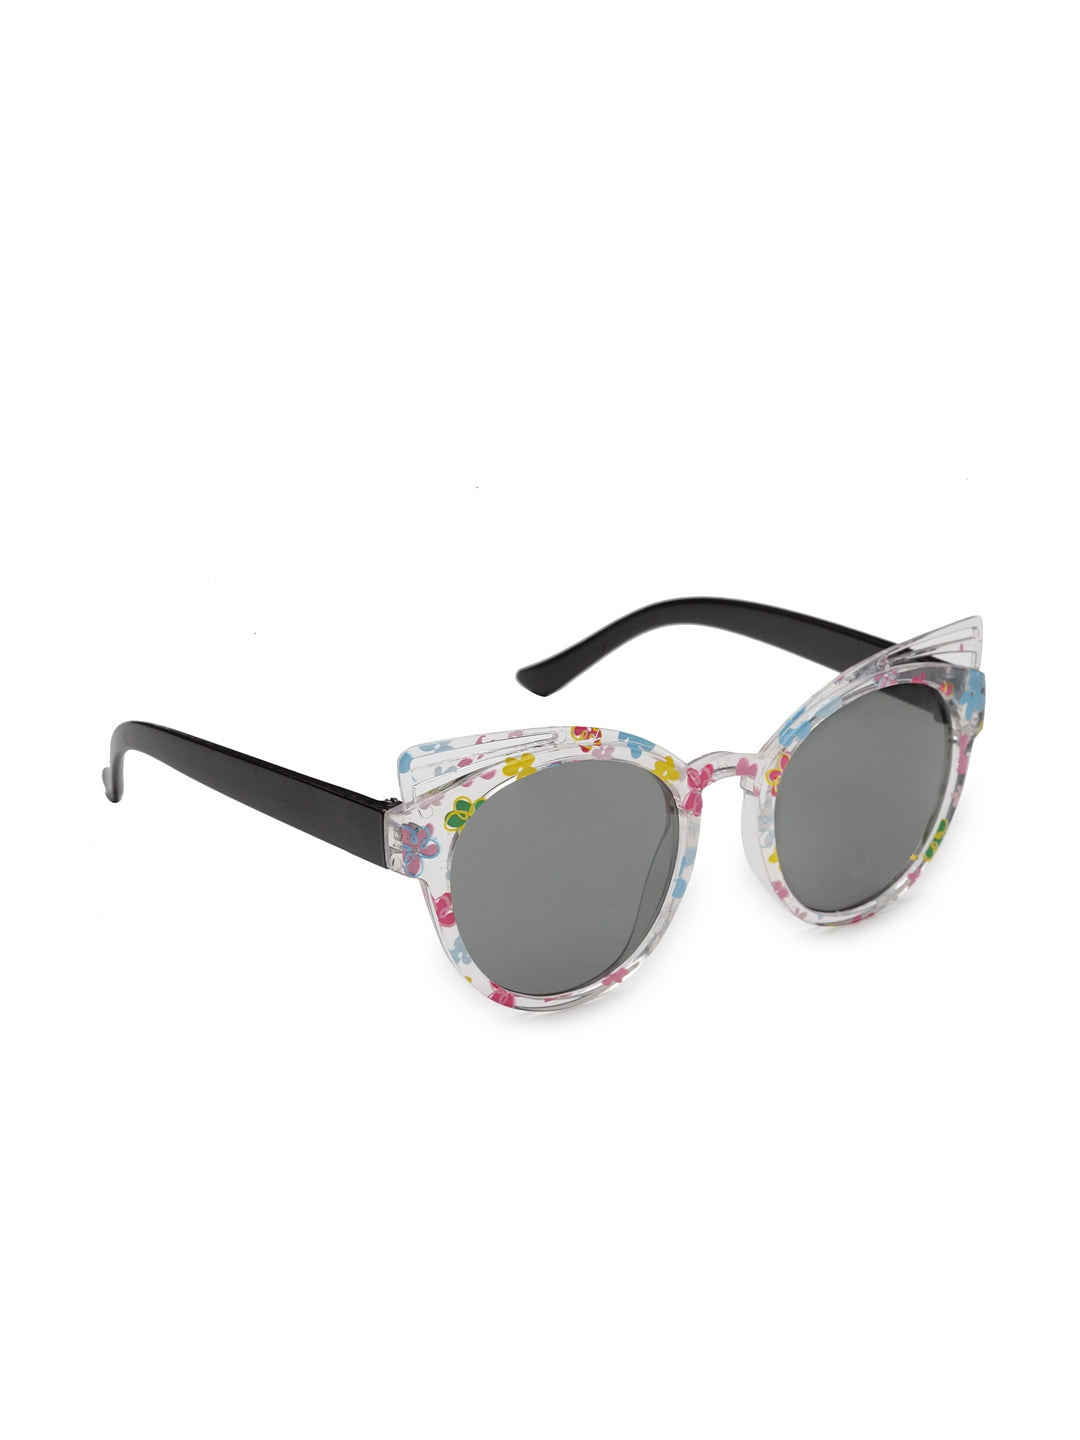 Stol'n Kids Yellow and Blue Bow Applique Rectangular Sunglasses:Yellow and Blue White